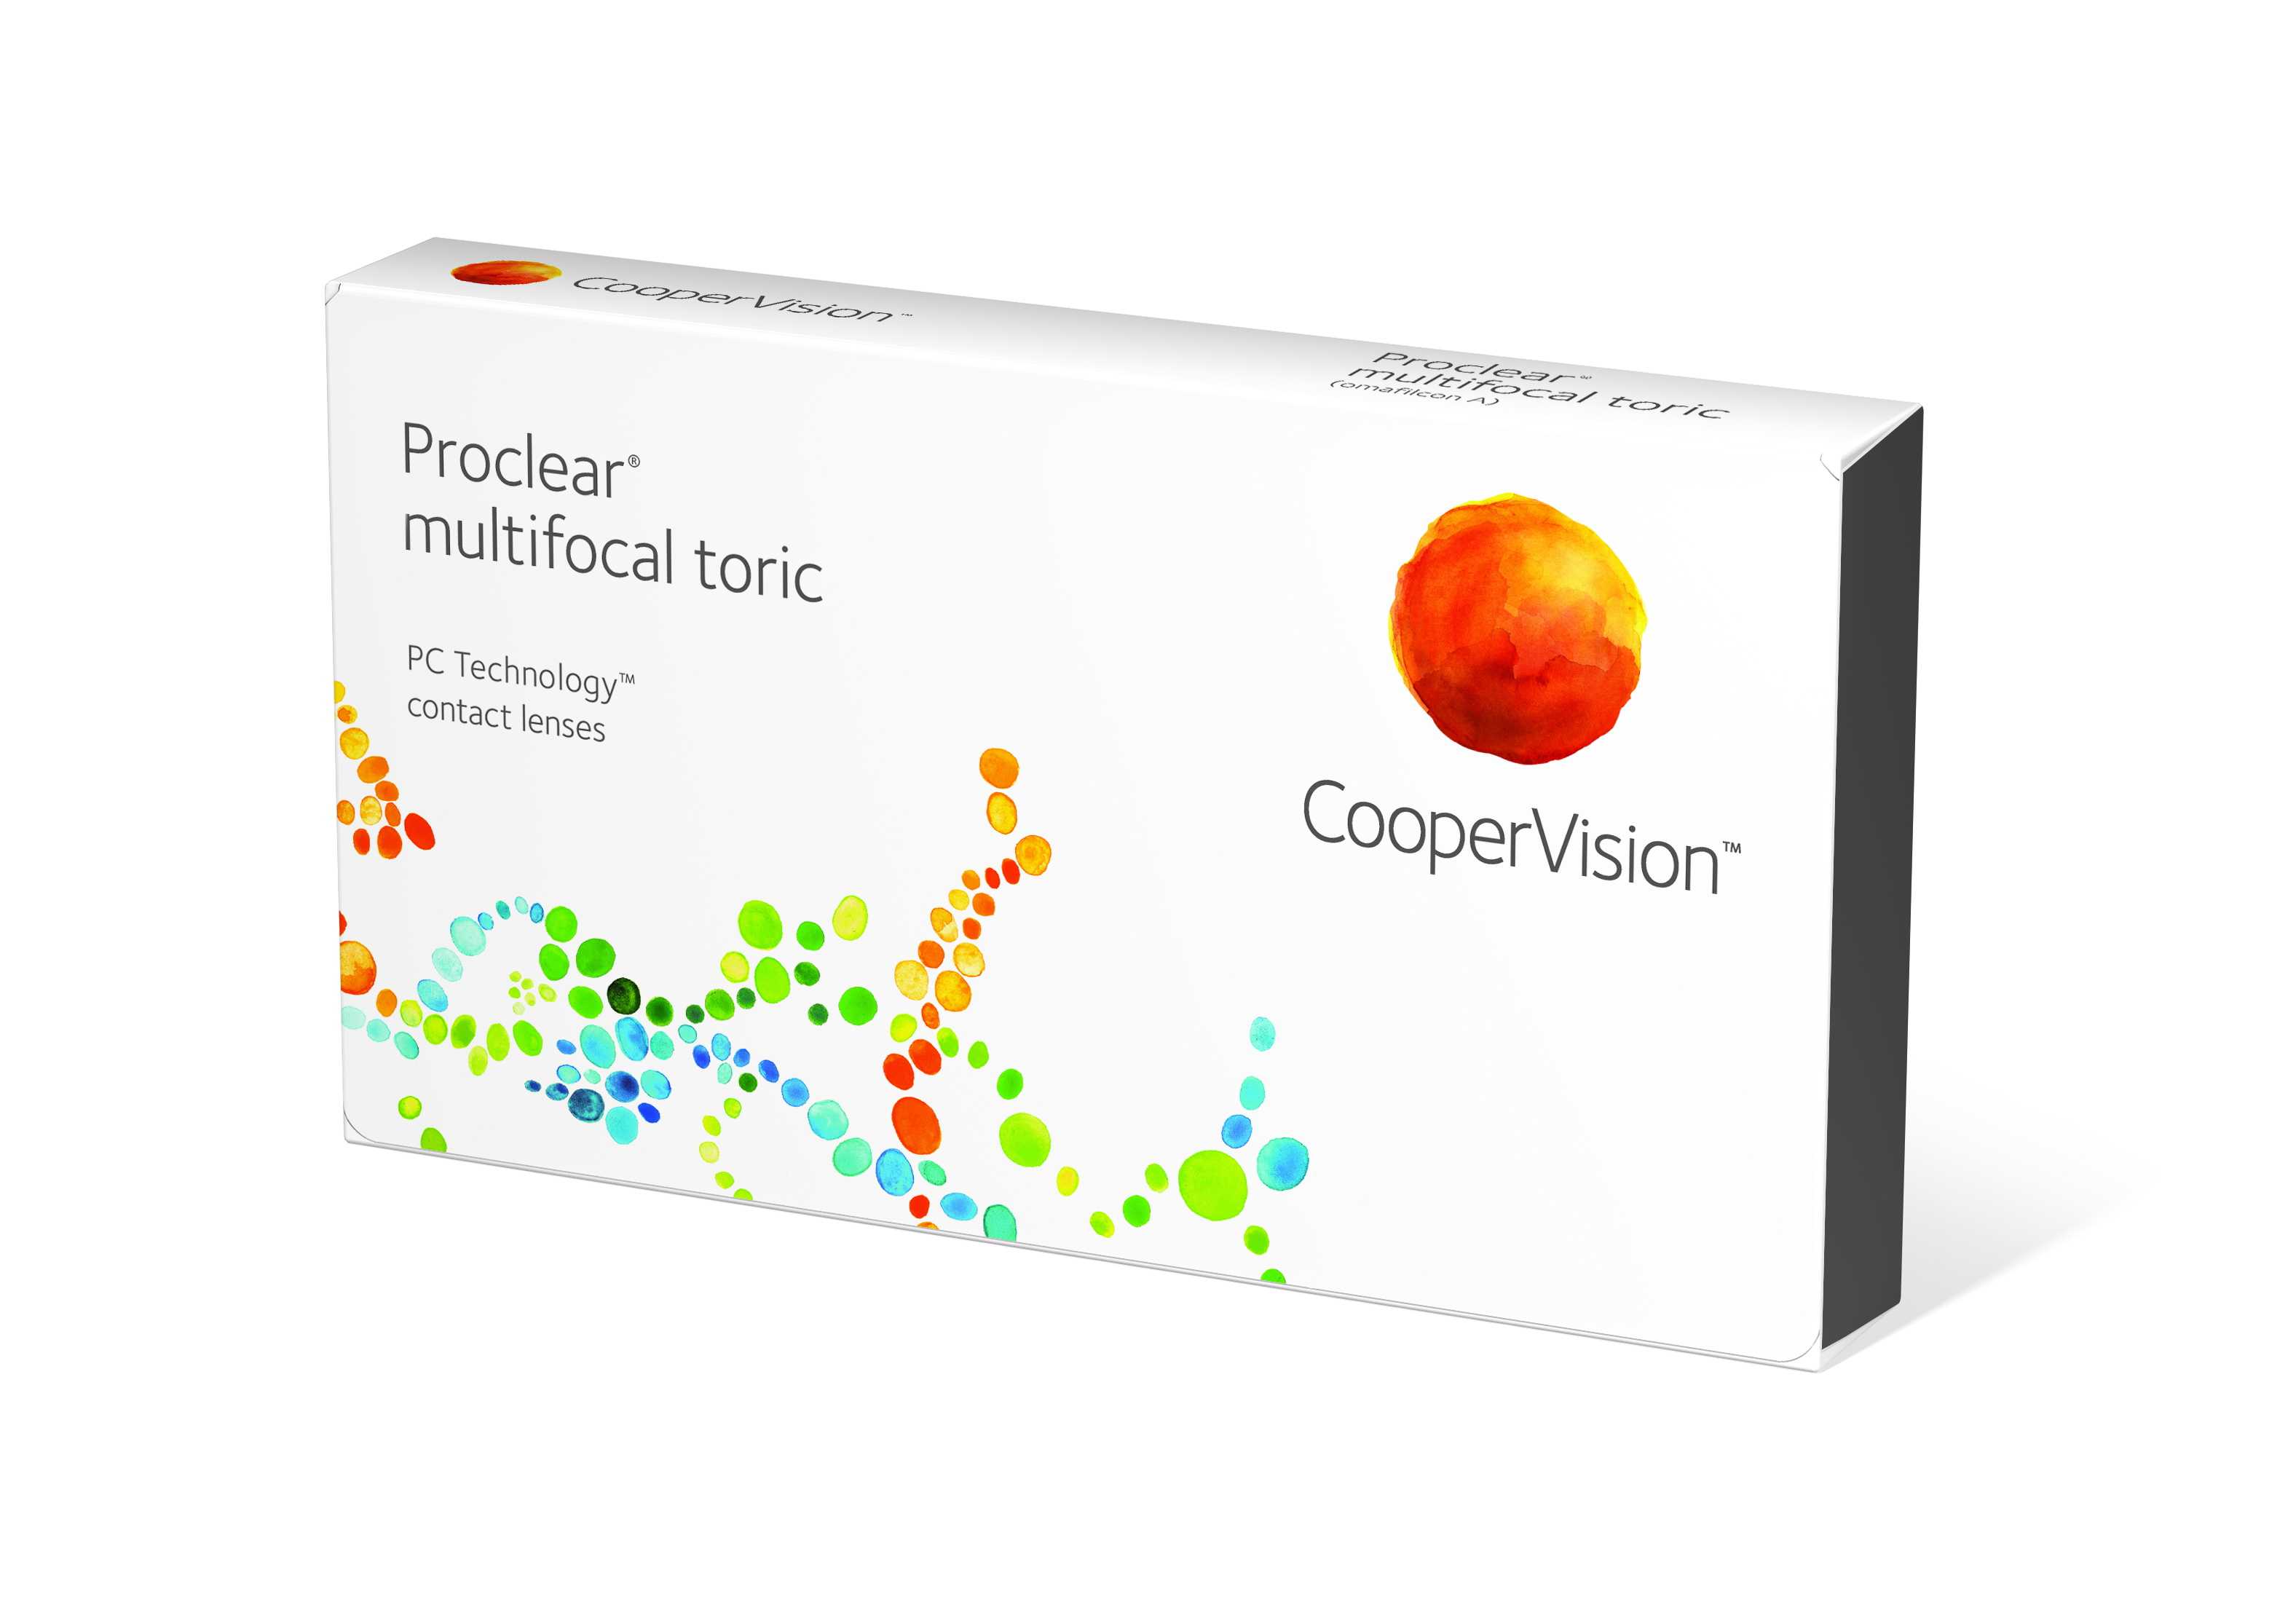  PROCLEAR MULTIFOCAL TORIC COOPERVISION